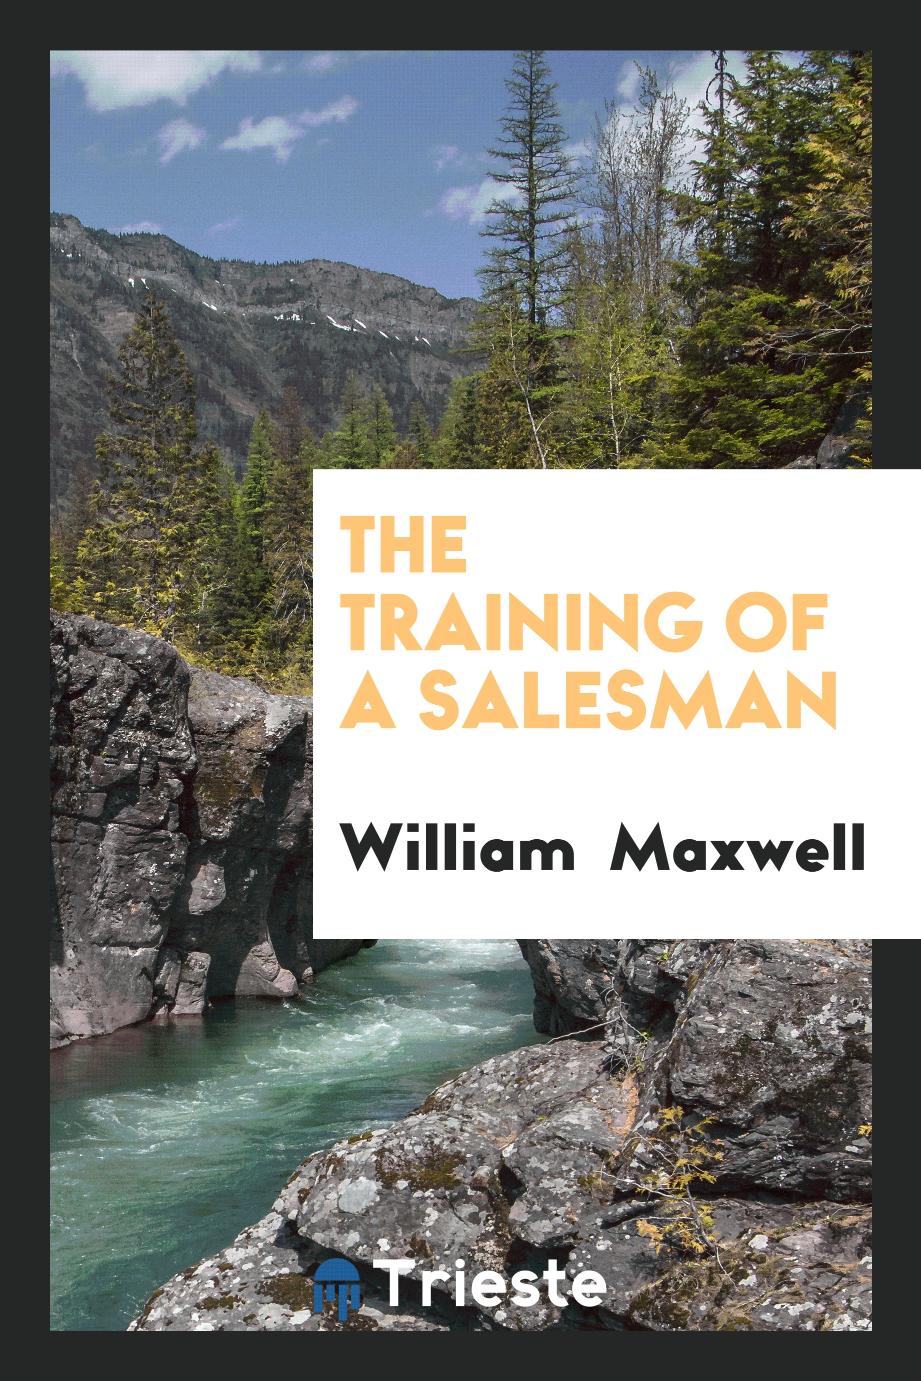 The training of a salesman